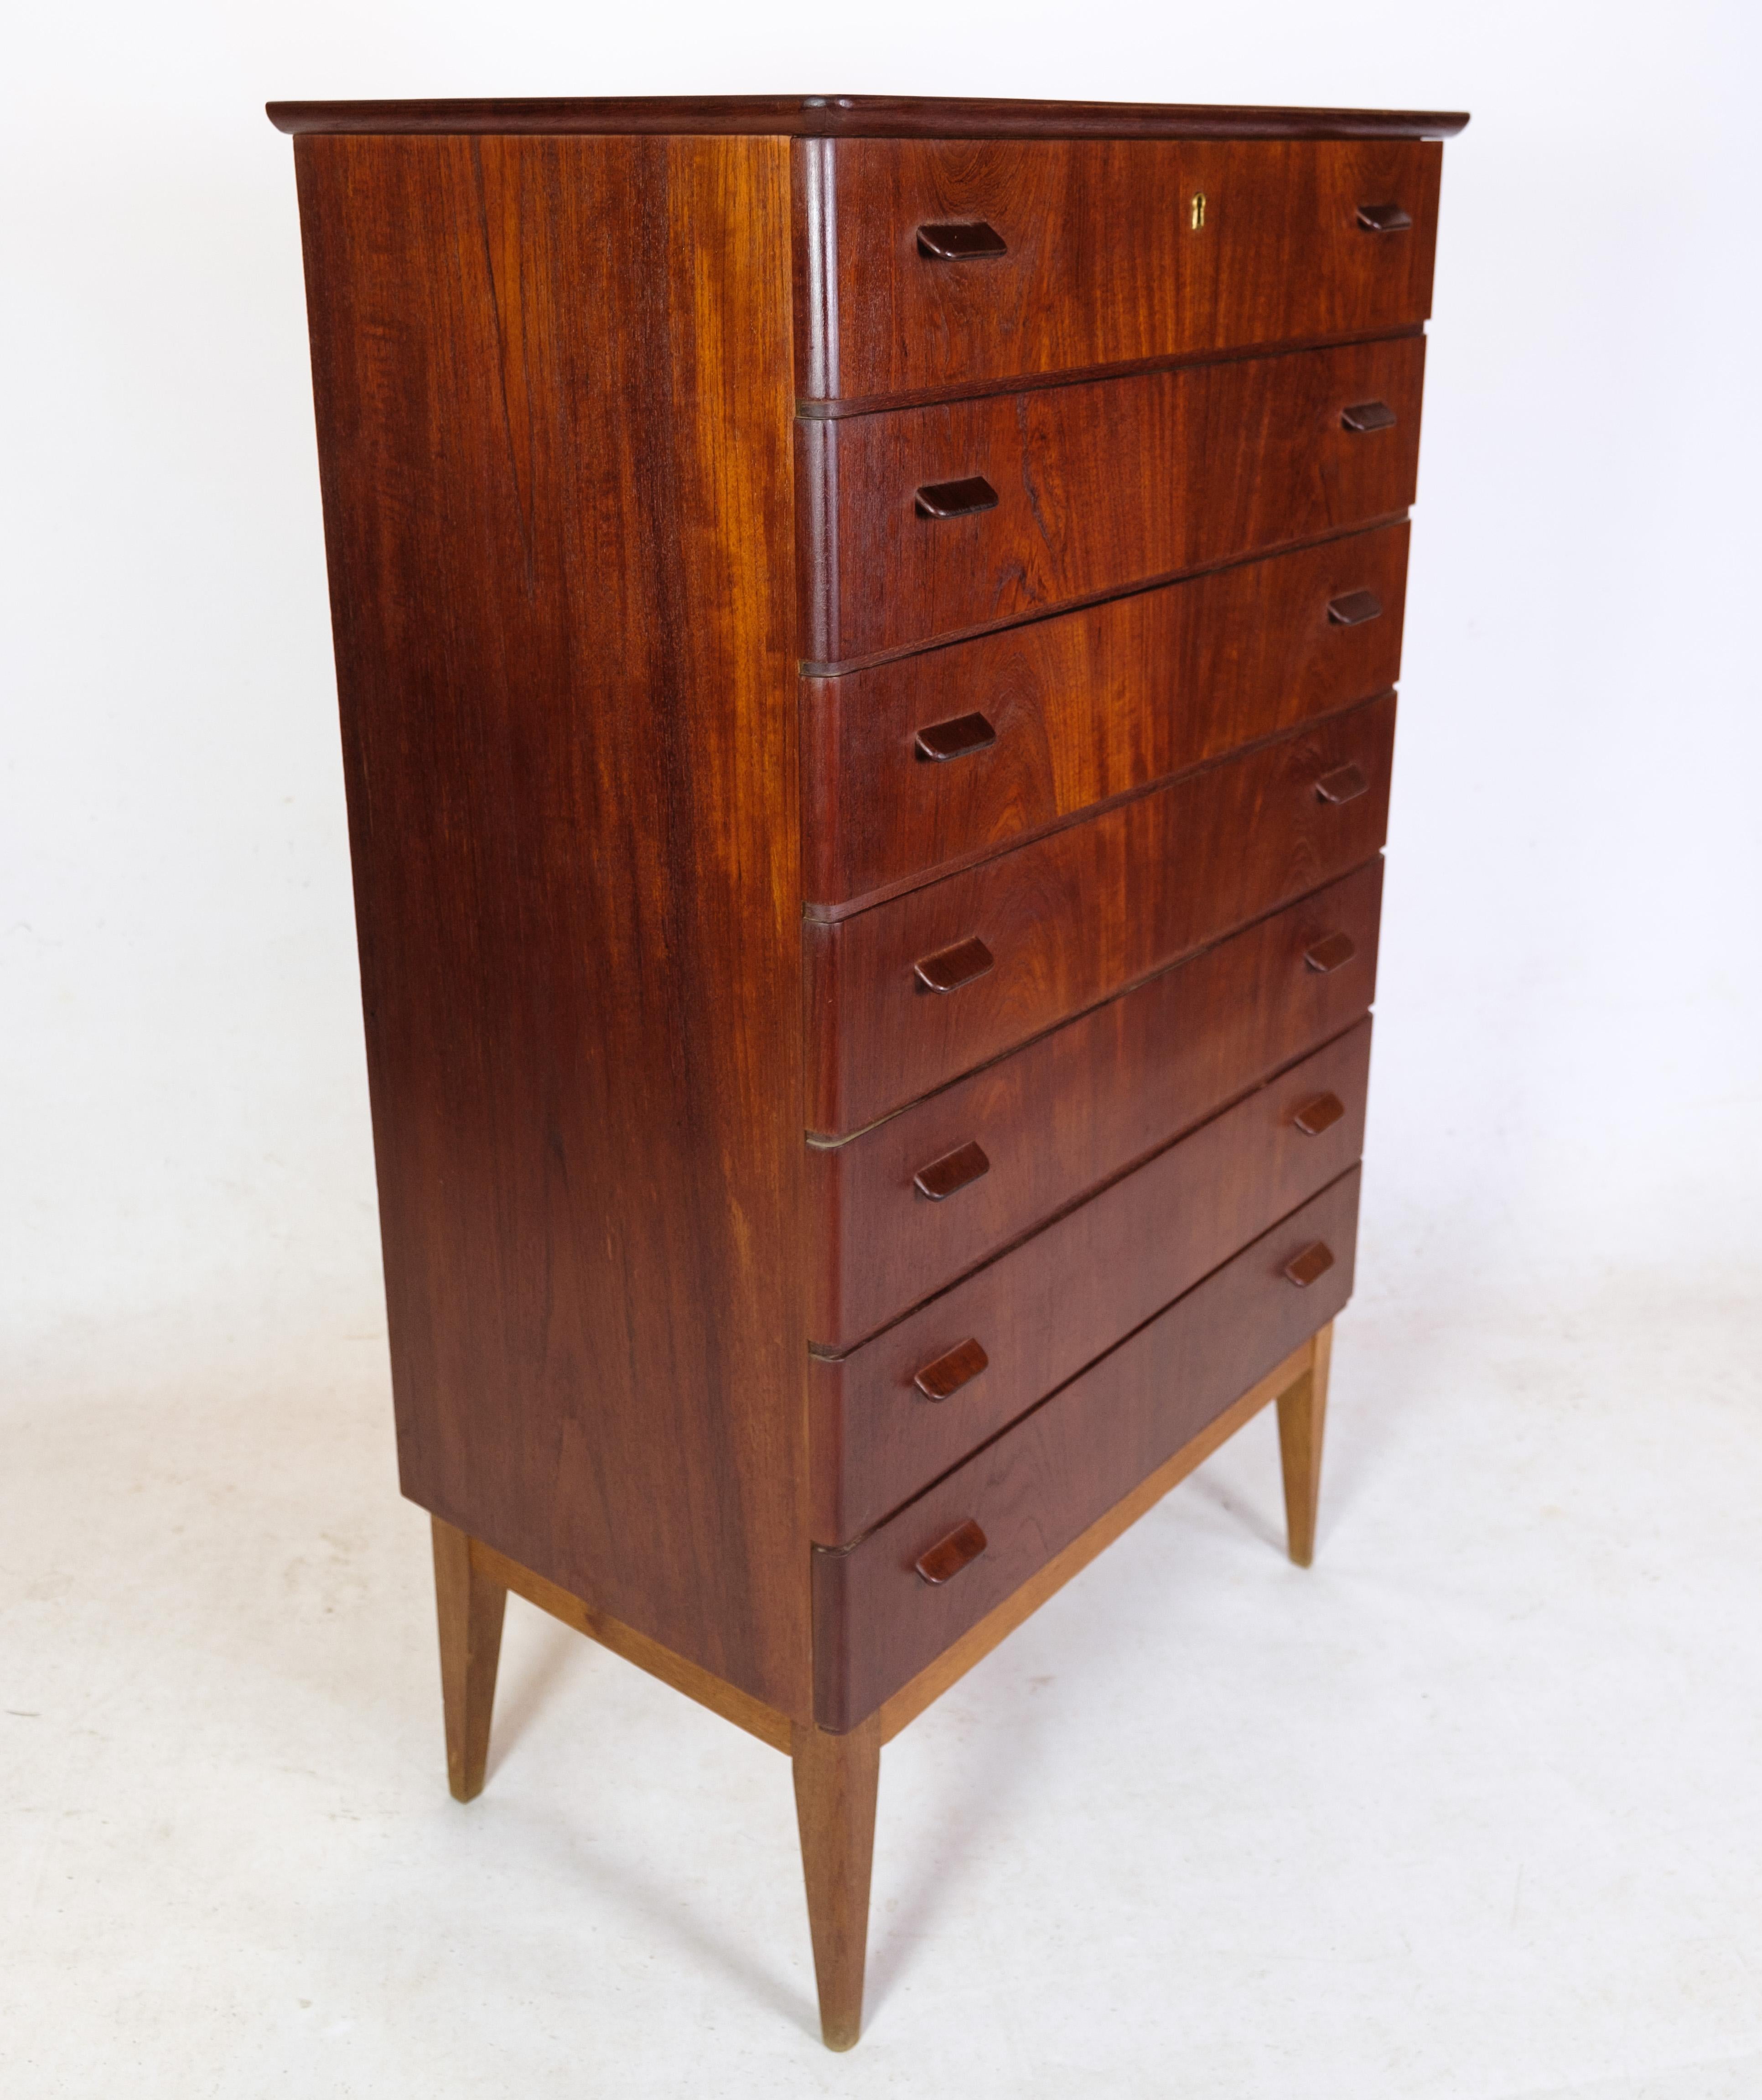 High chest of drawers designed by Børge Mogensen with 7 teak drawers and oak legs from around the 1960s.
Measurements in cm: H:117 W:70 D:42